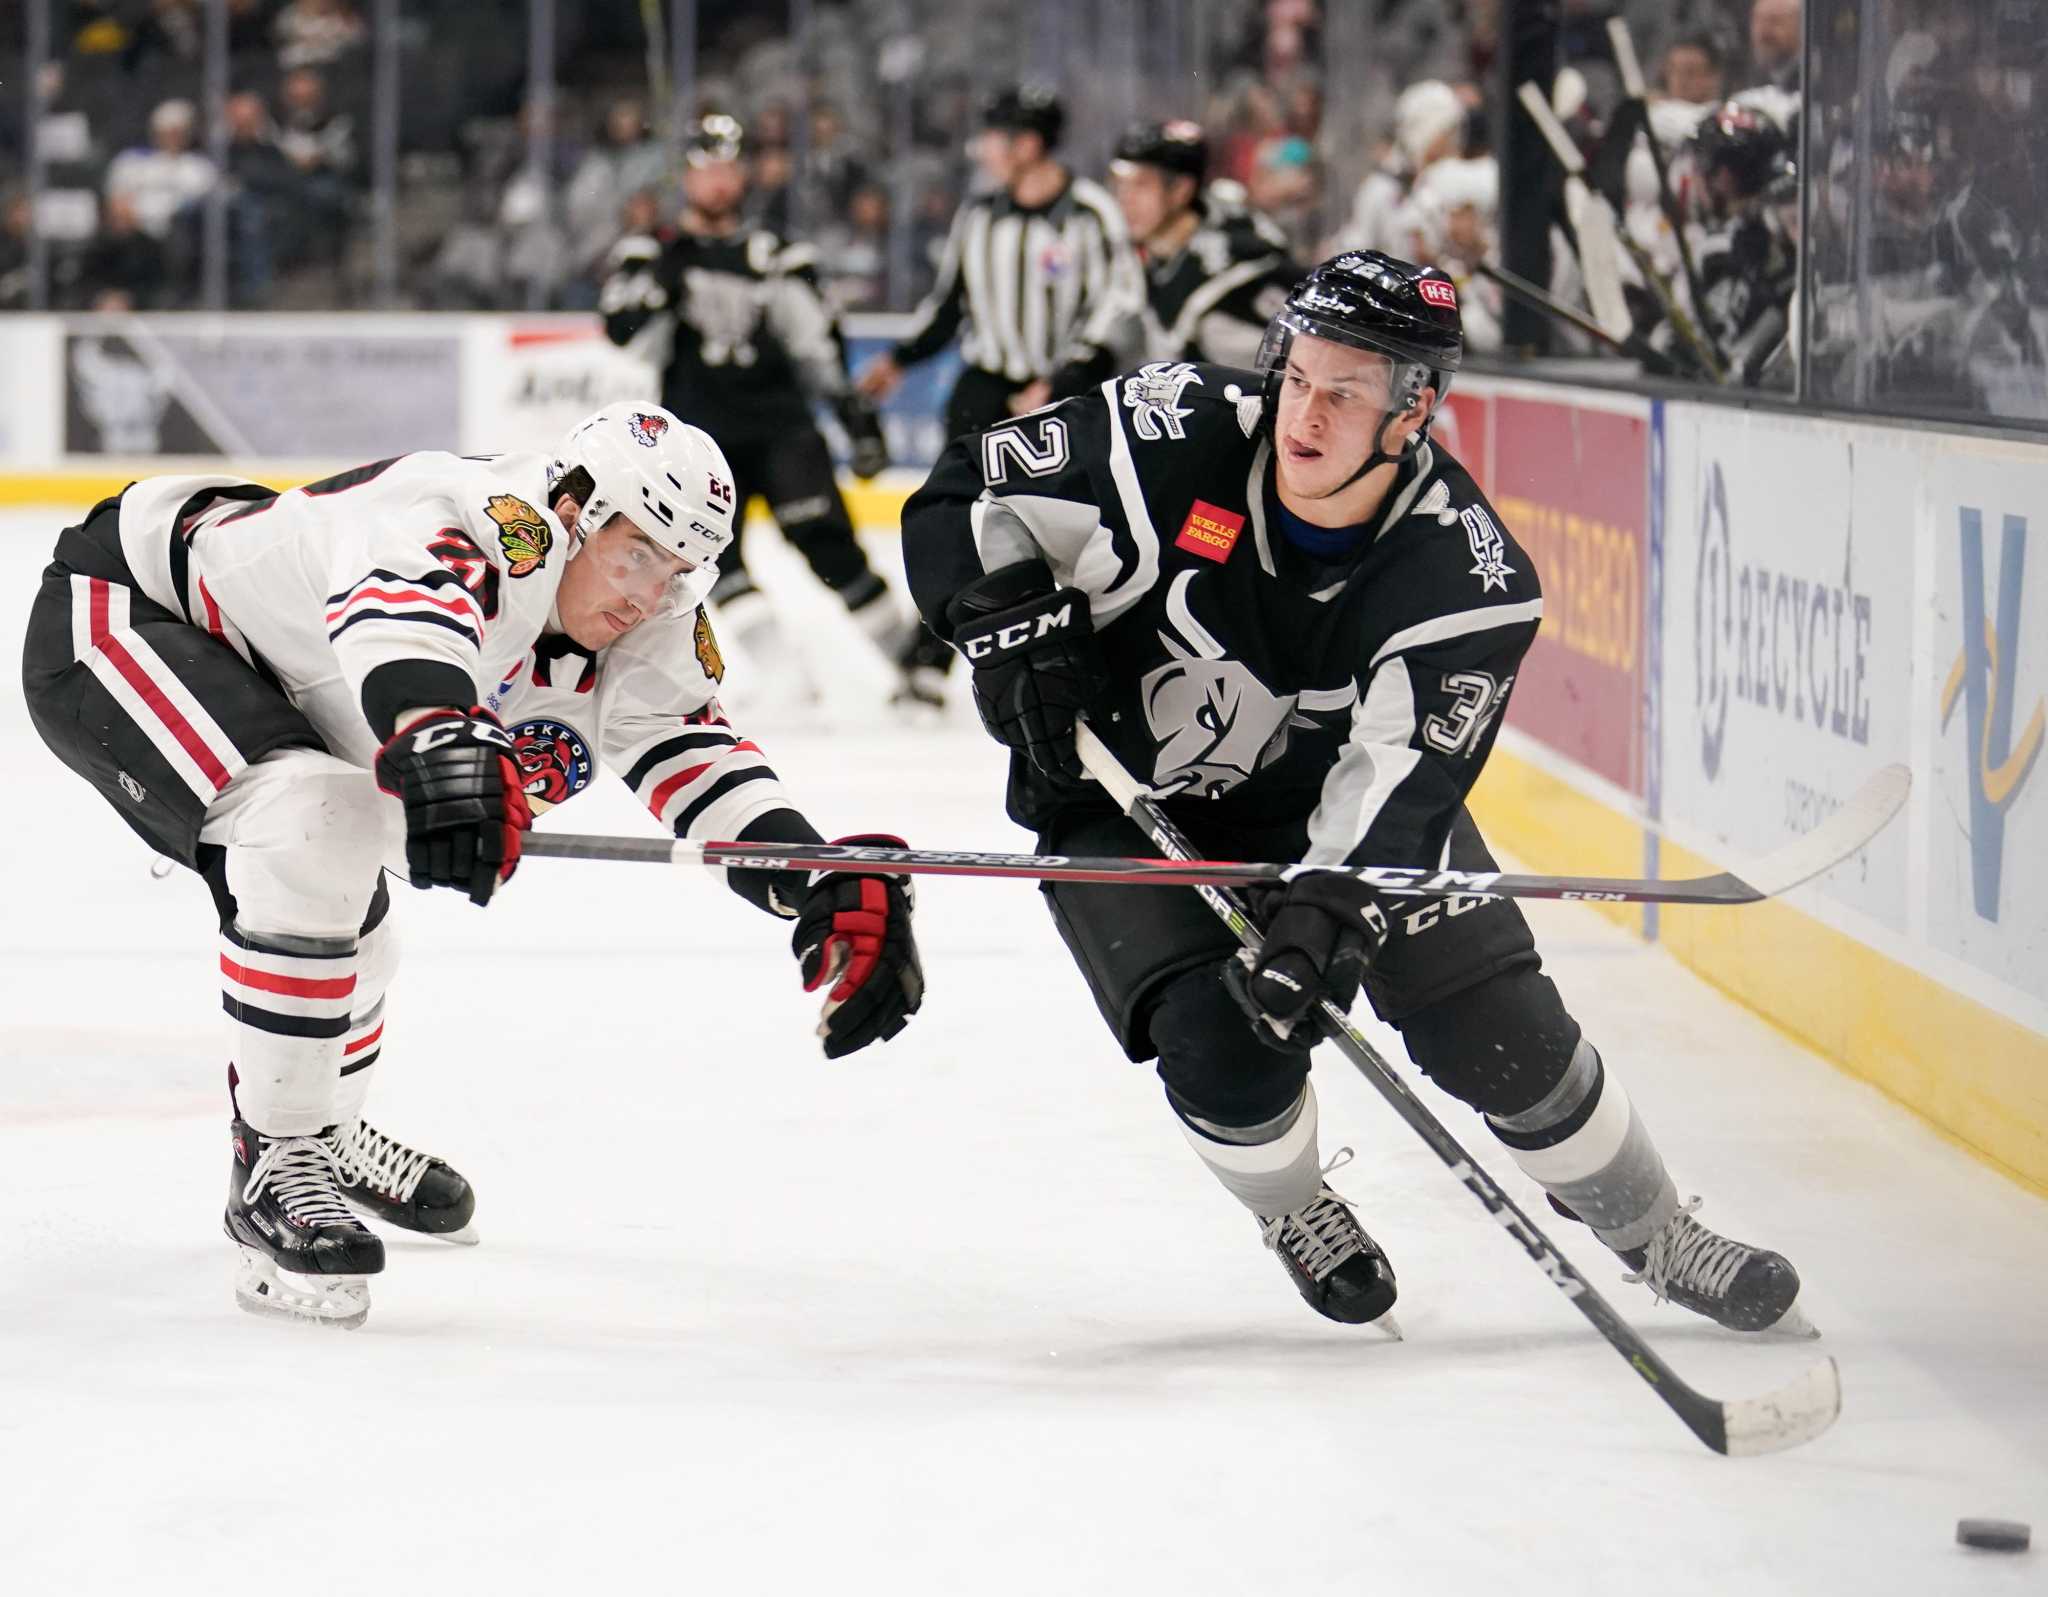 San Antonio Rampage edge Cleveland Monsters on late goal 